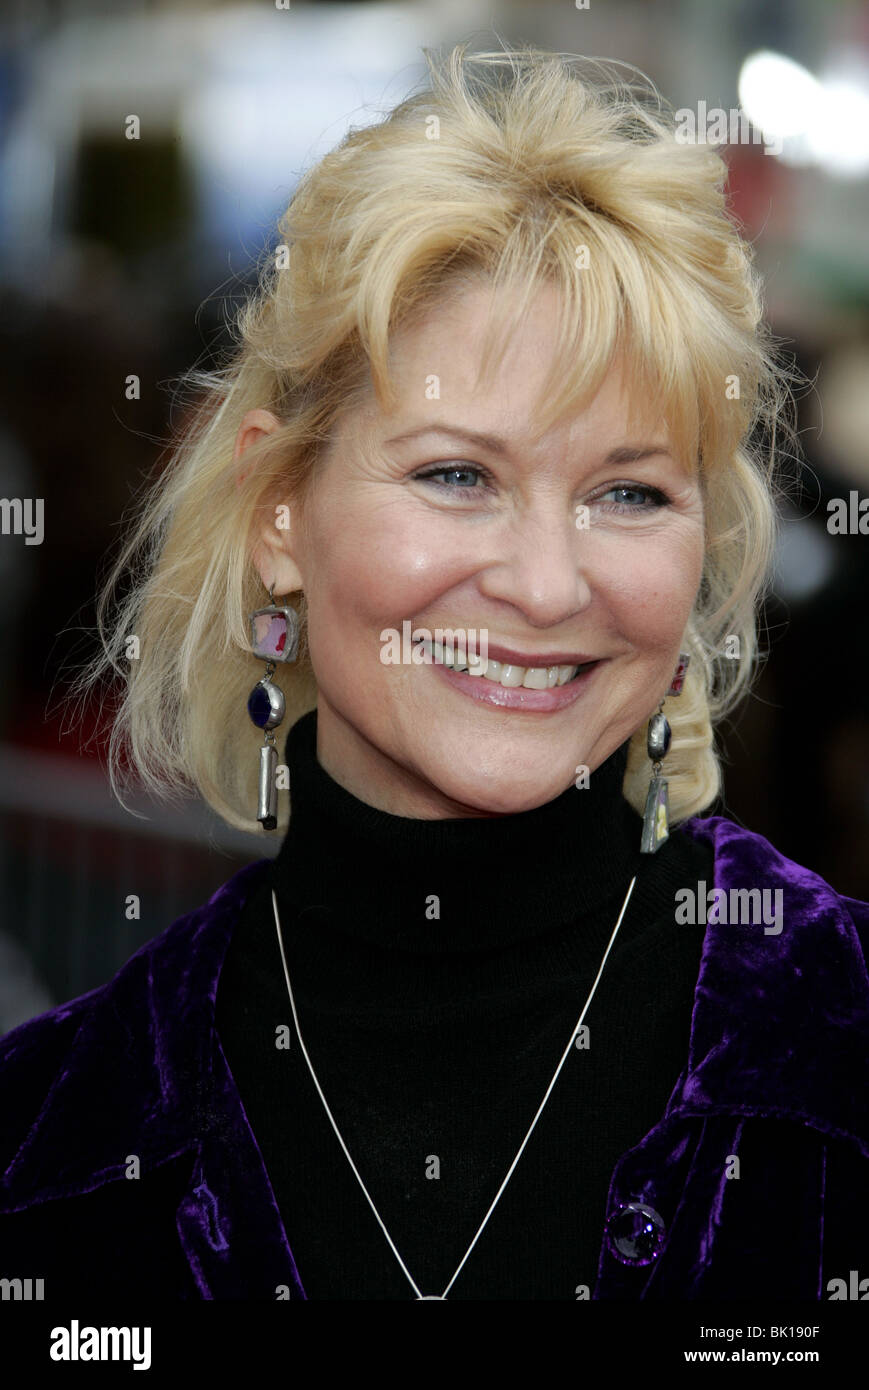 DEE WALLACE STONE RV PREMIERE WESTWOOD LOS ANGELES USA 23 April 2006 Stock Photo